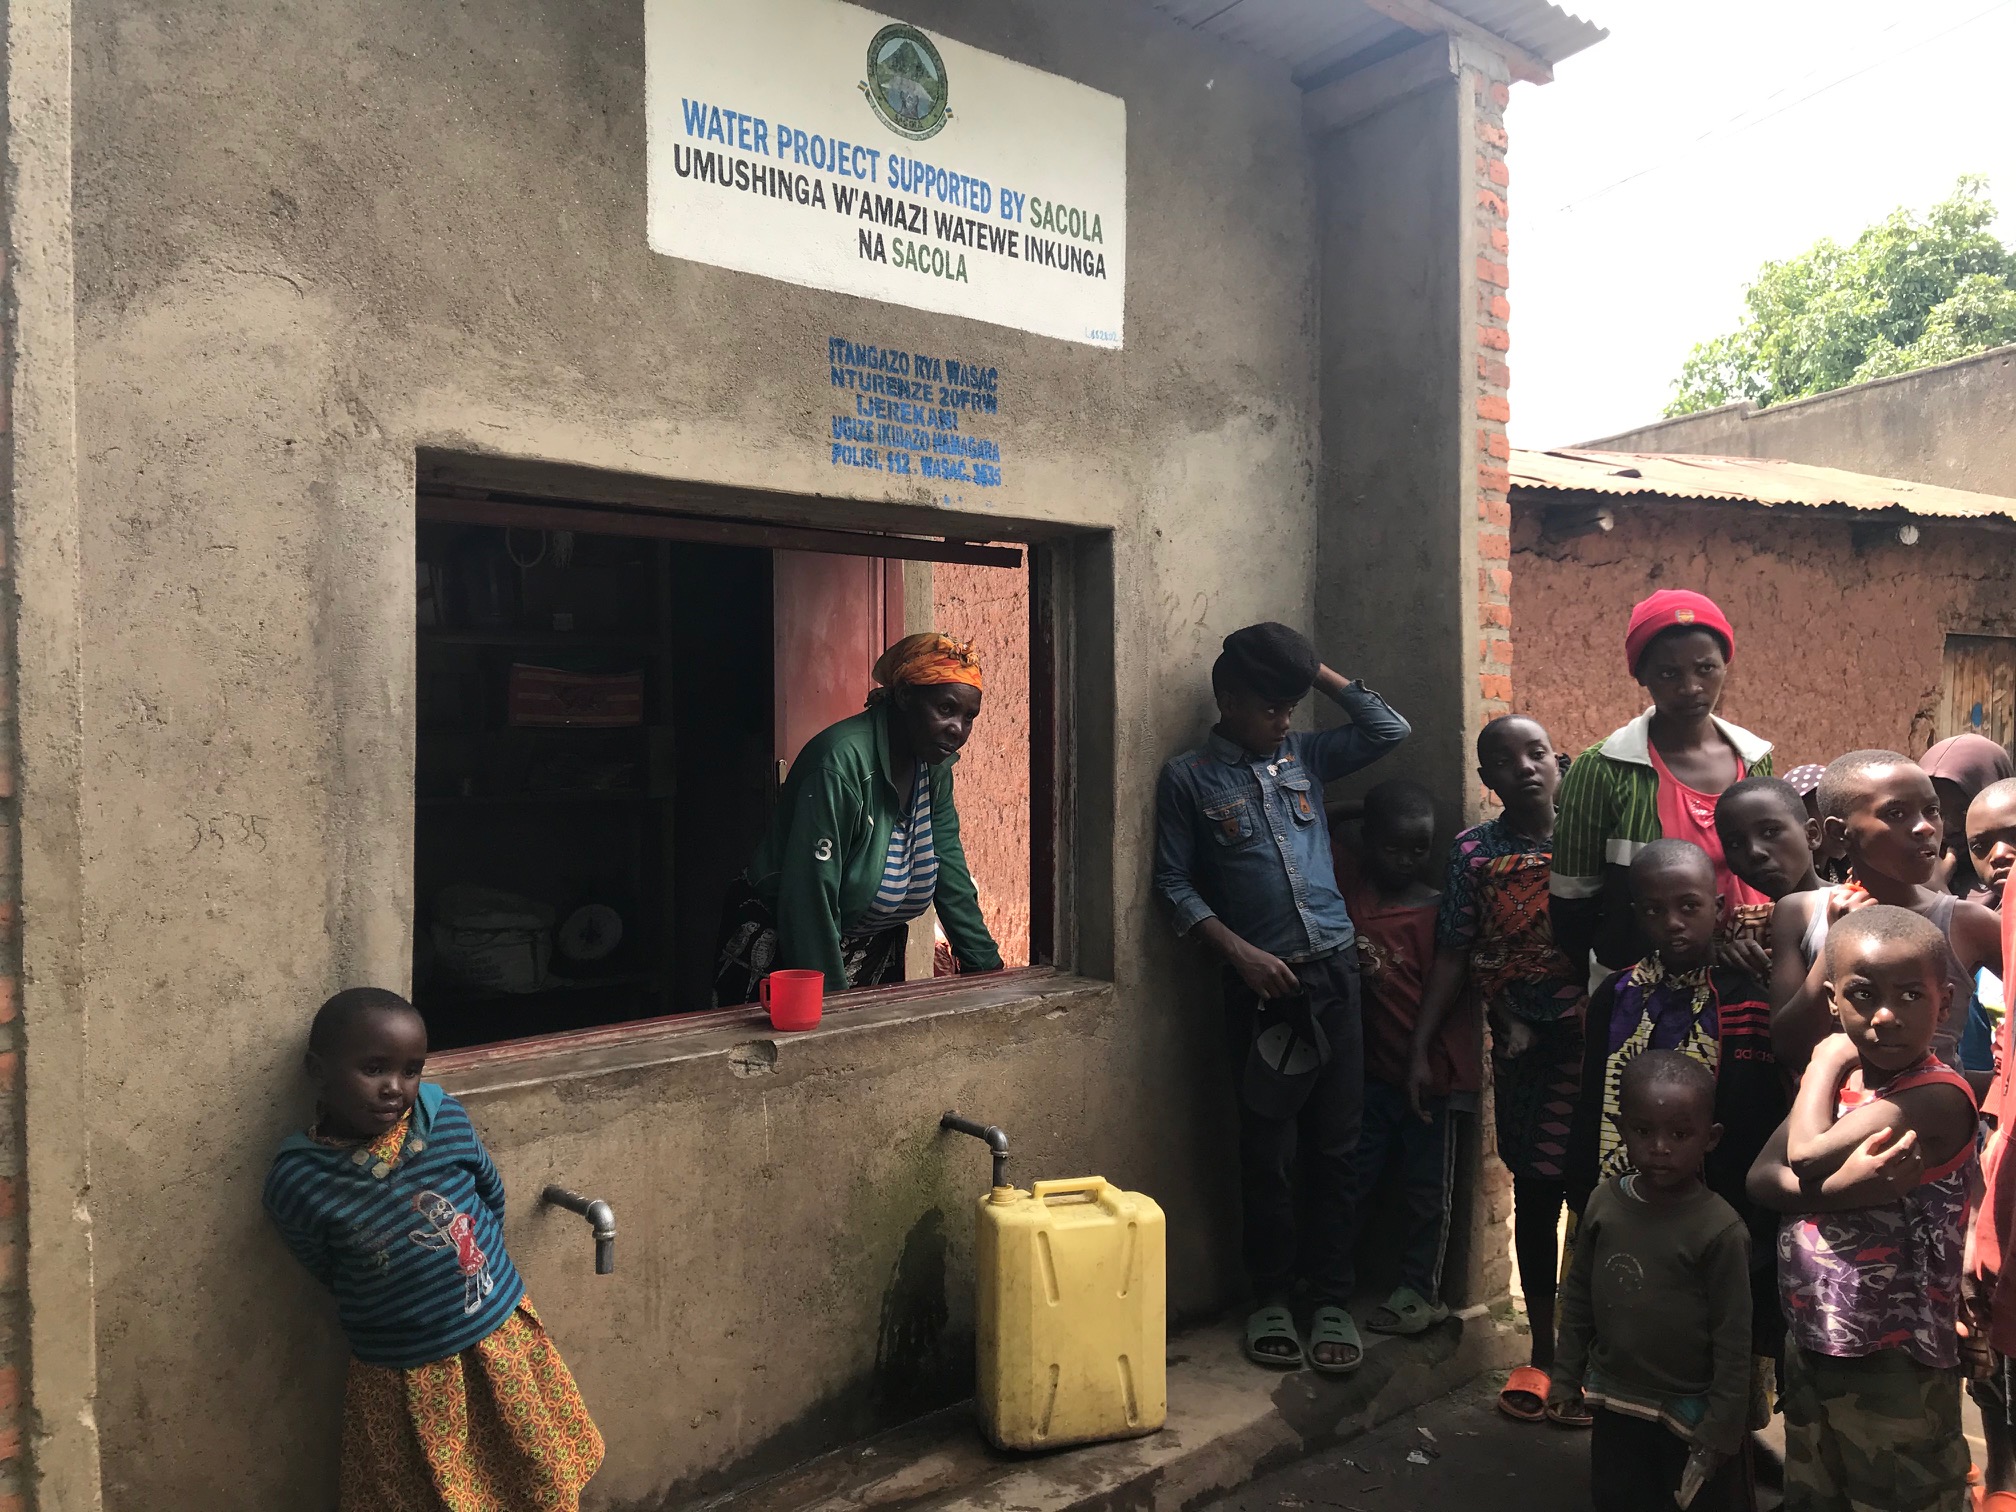 Planetary health solutions: in Rwanda, a woman welcomes local people and collects payments for water, money that is reinvested in the community. © Nicole de Paula